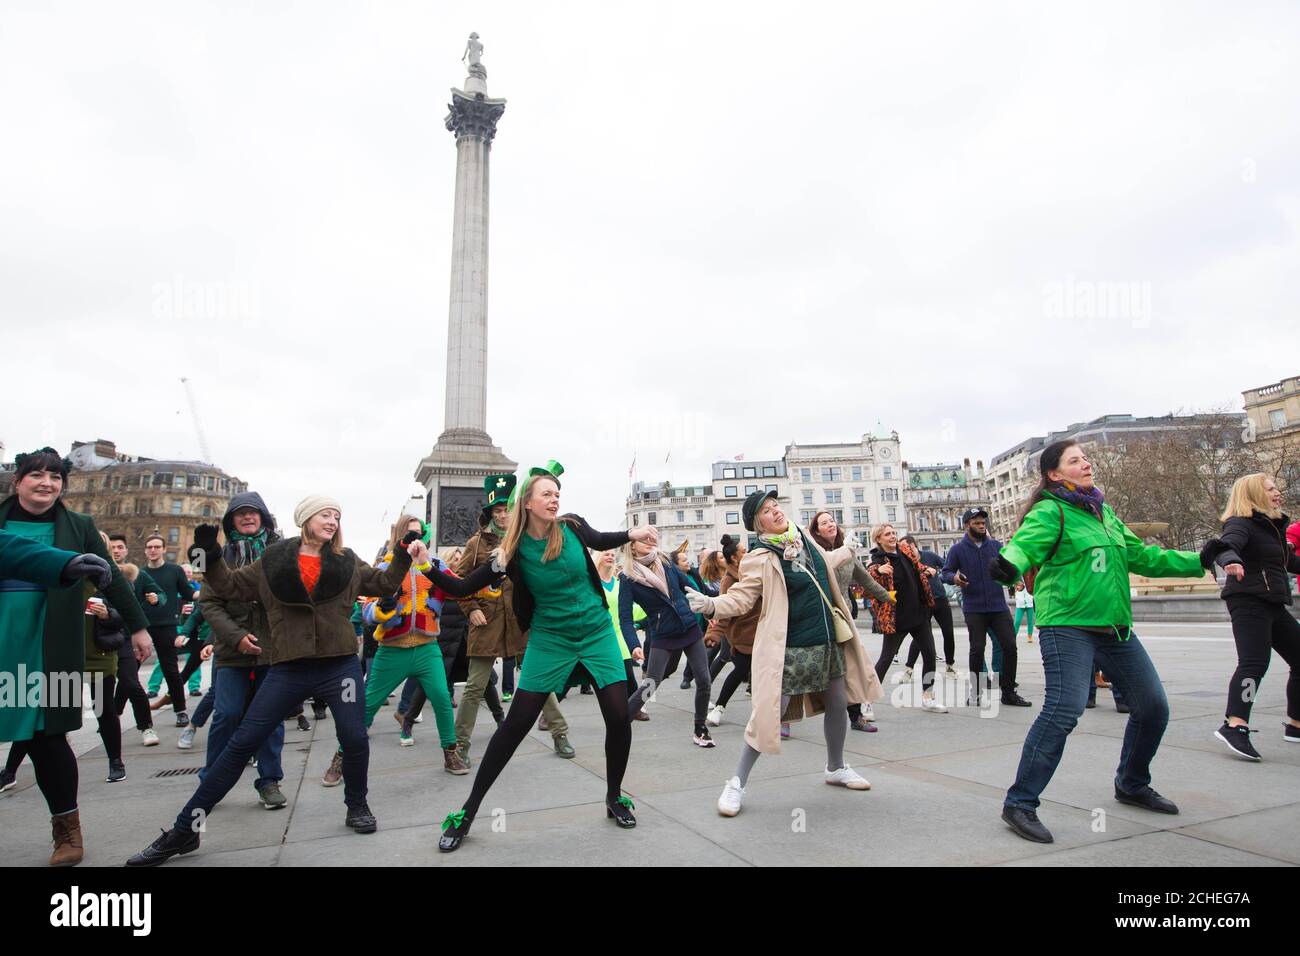 EDITORIAL USE ONLY A human shamrock formation created by over 200 participants and one dog, all wearing green, appeared in Trafalgar Square, as part of Tourism Ireland's St Patrick's Day celebrations in association with the Mayor of London's #LondonIsOpen campaign. Stock Photo